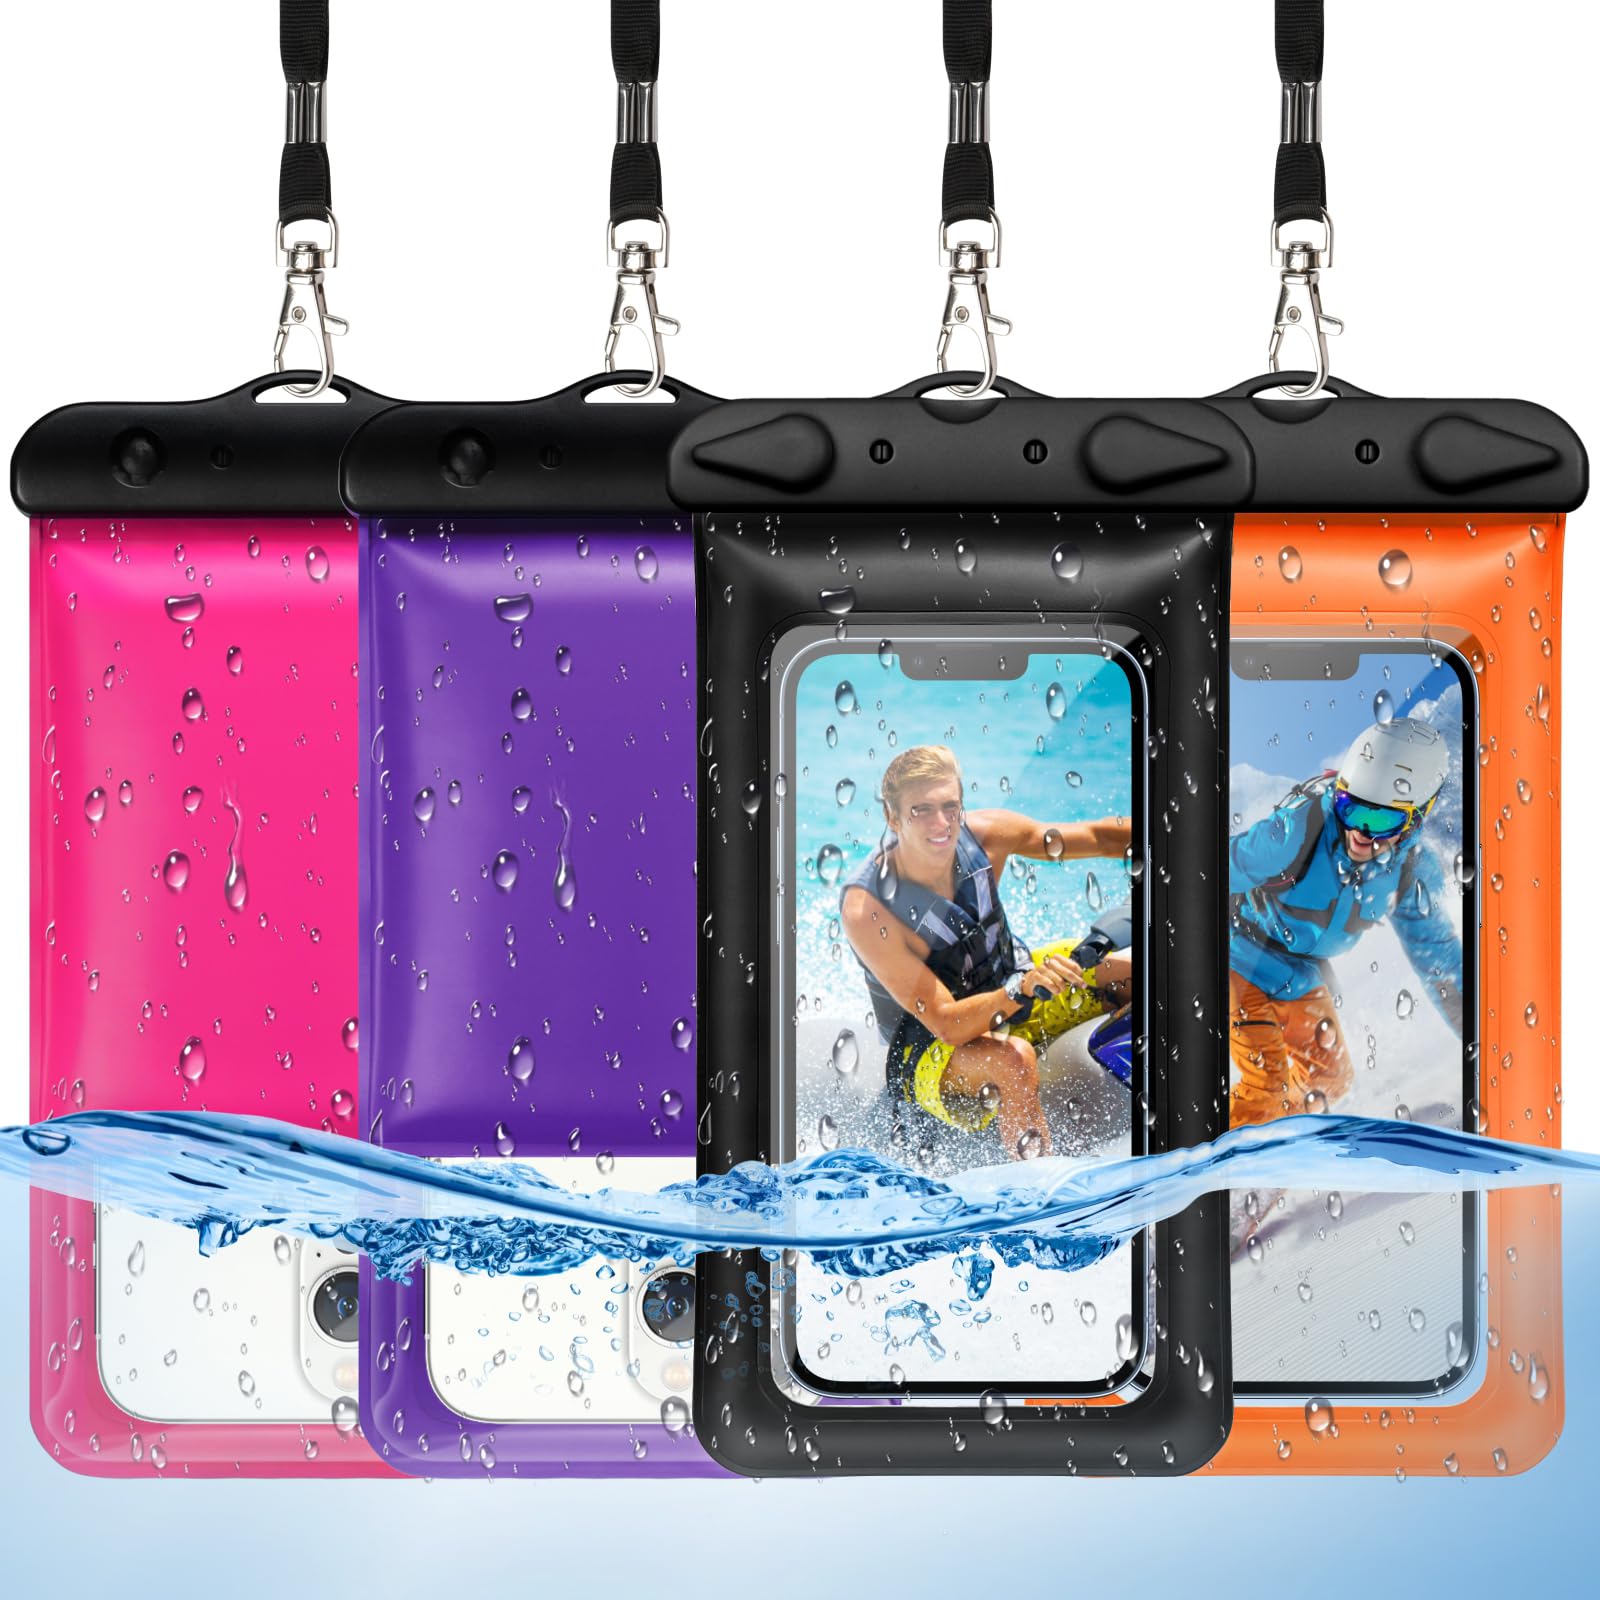 F-color Floating Waterproof Phone Pouch - Waterproof Phone Case - Underwater Dry Bag - Waterproof Cell Phone Pouch Up to 7.0